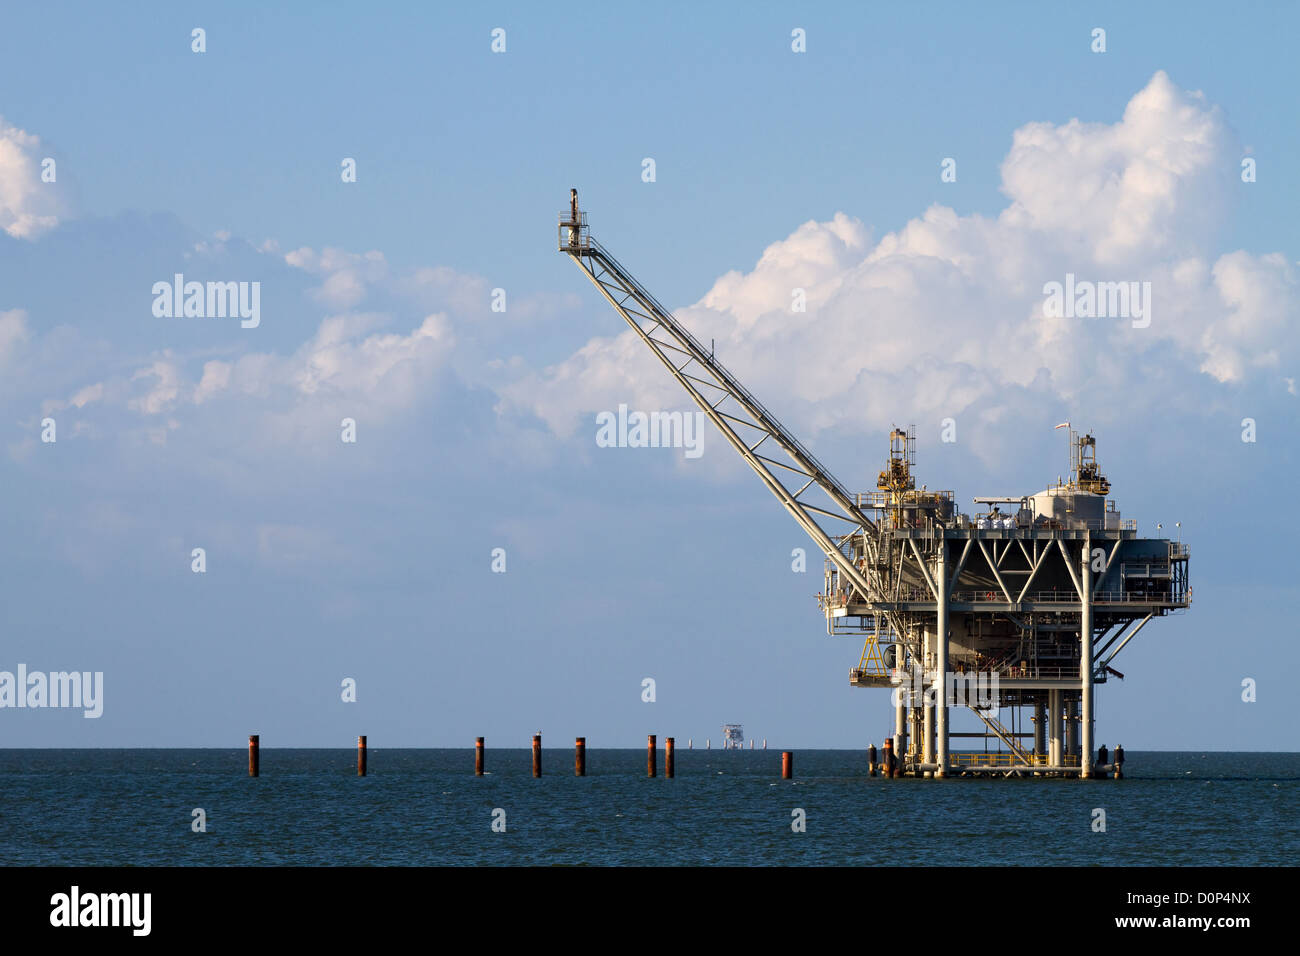 Can you use a cell phone on an oil rig?